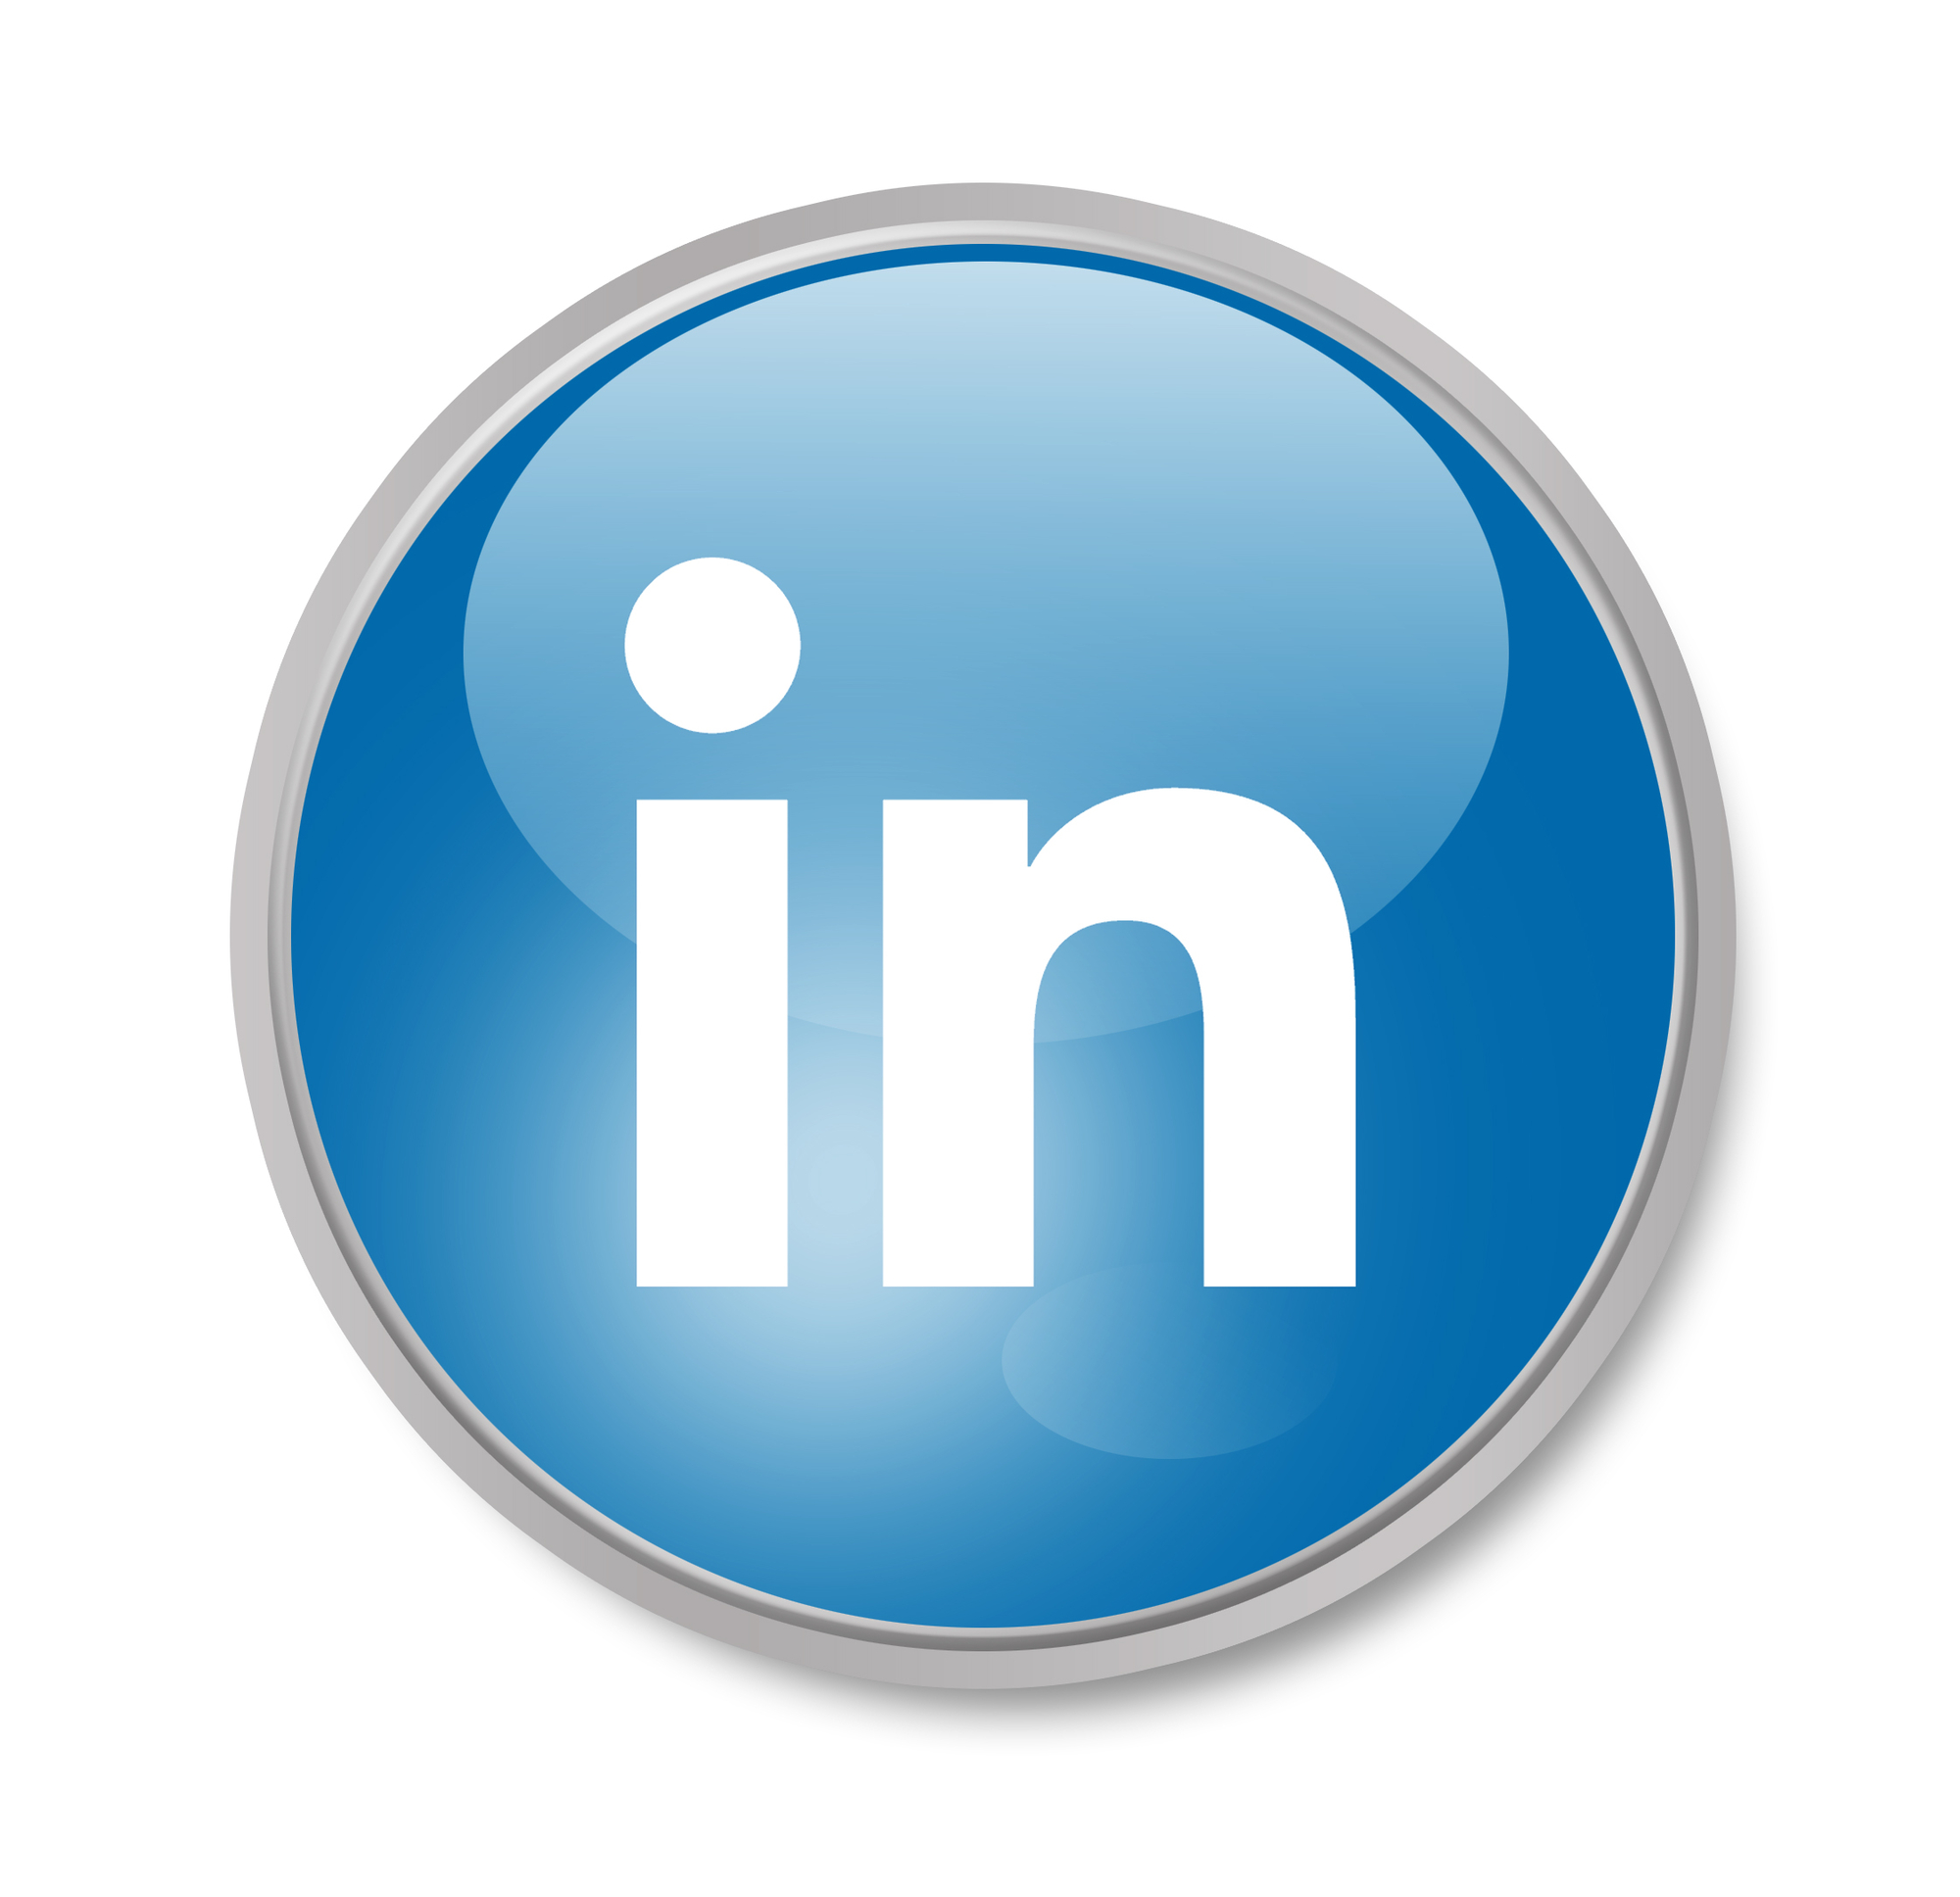 T2 - Why do we focus so much on LinkedIn?